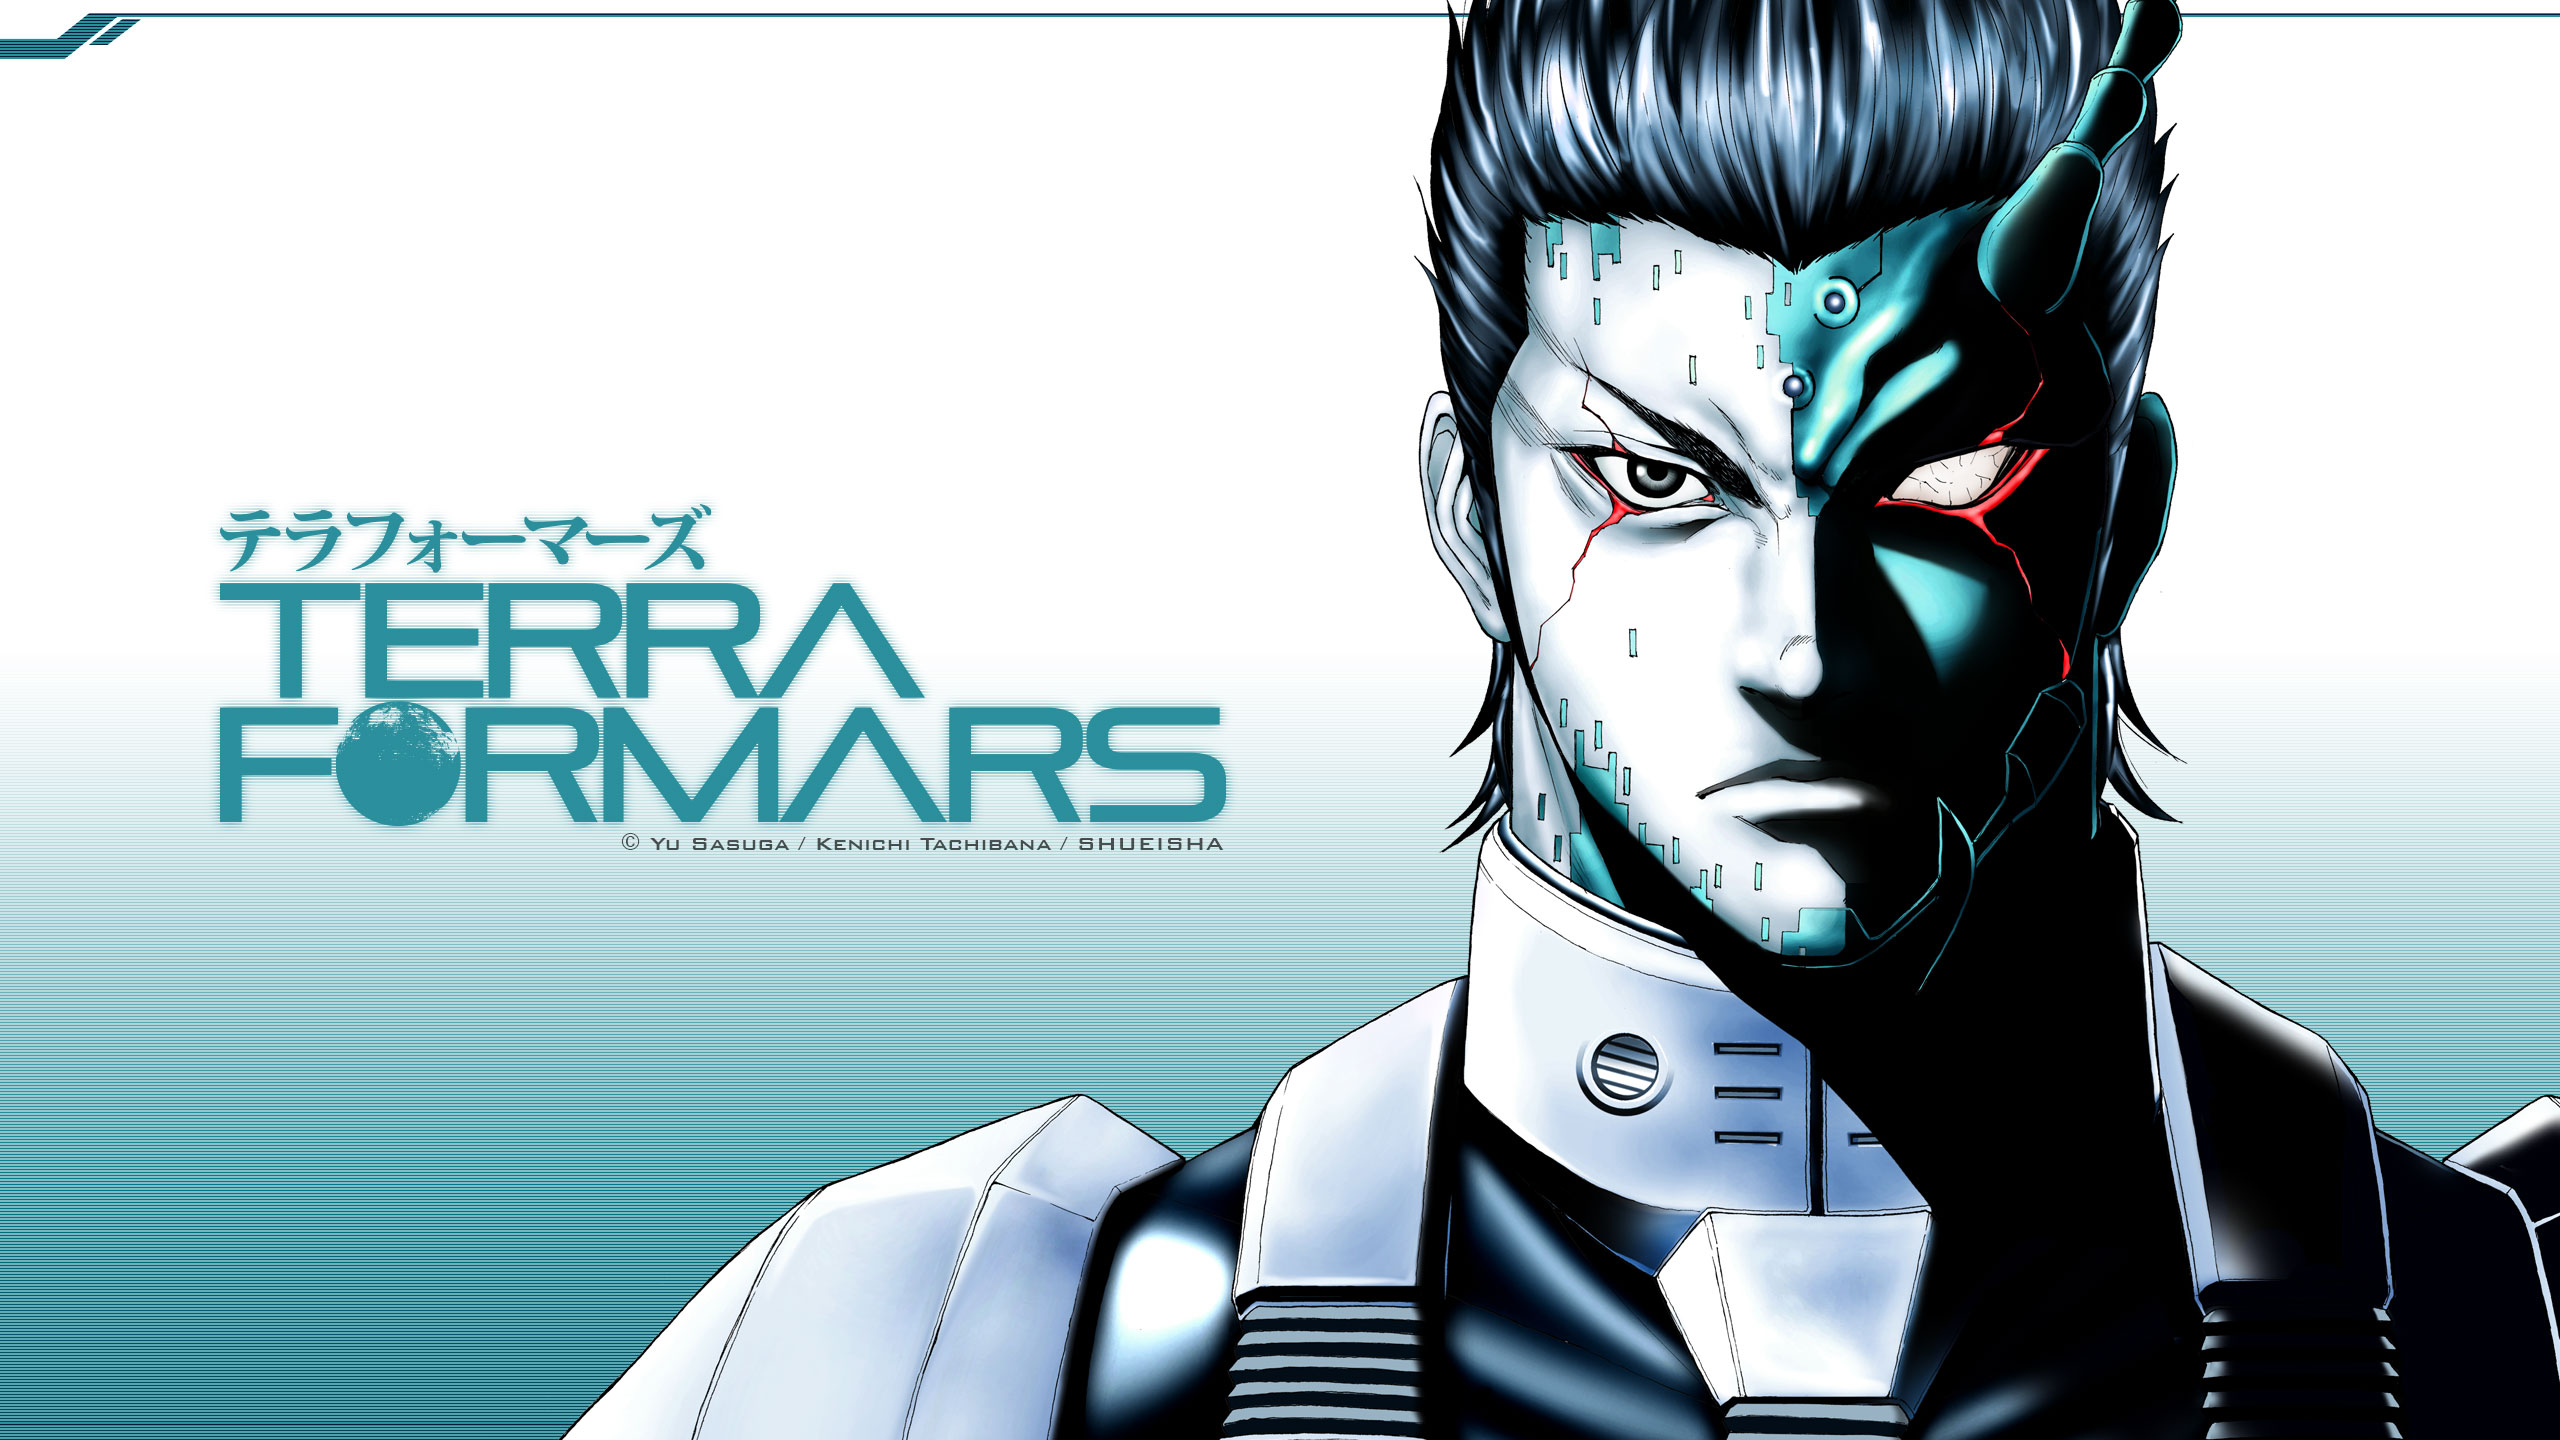 Pin By Mijail Montes On Terra Formars Terra Formars Wallpaper Backgrounds Background Images